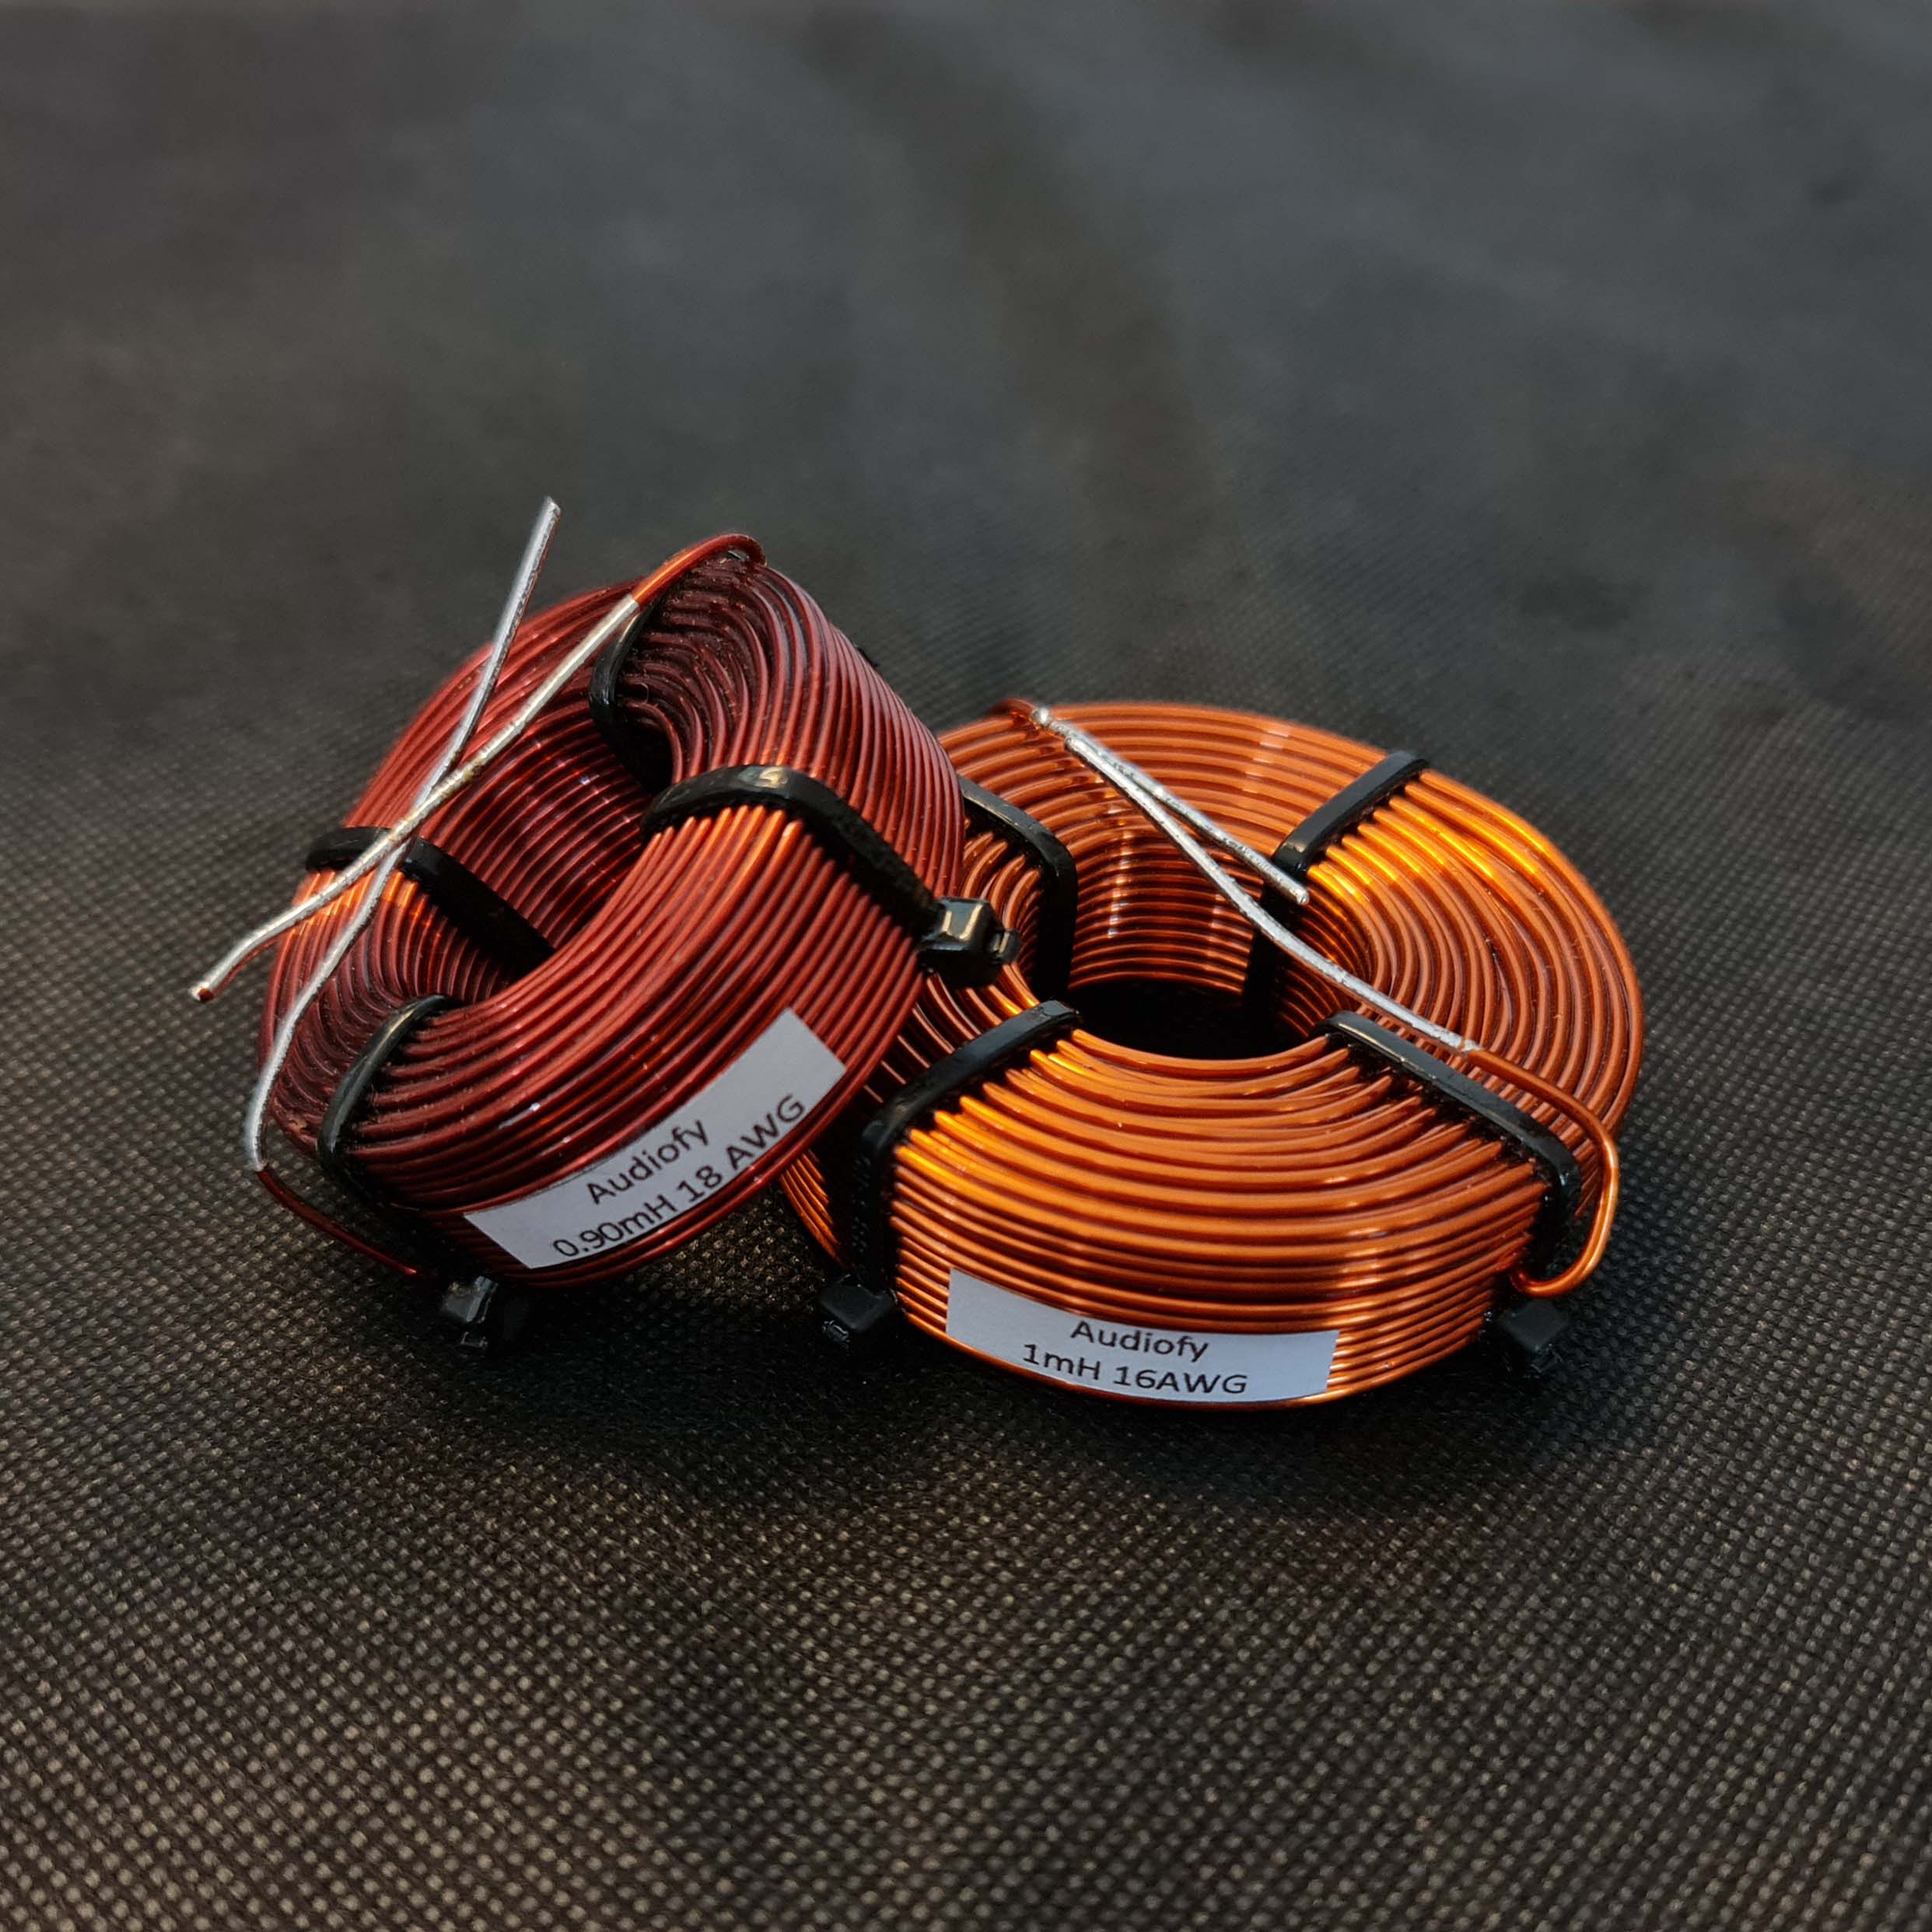 Audiofy 0.70mH 18 AWG Air Core Crossover Inductor